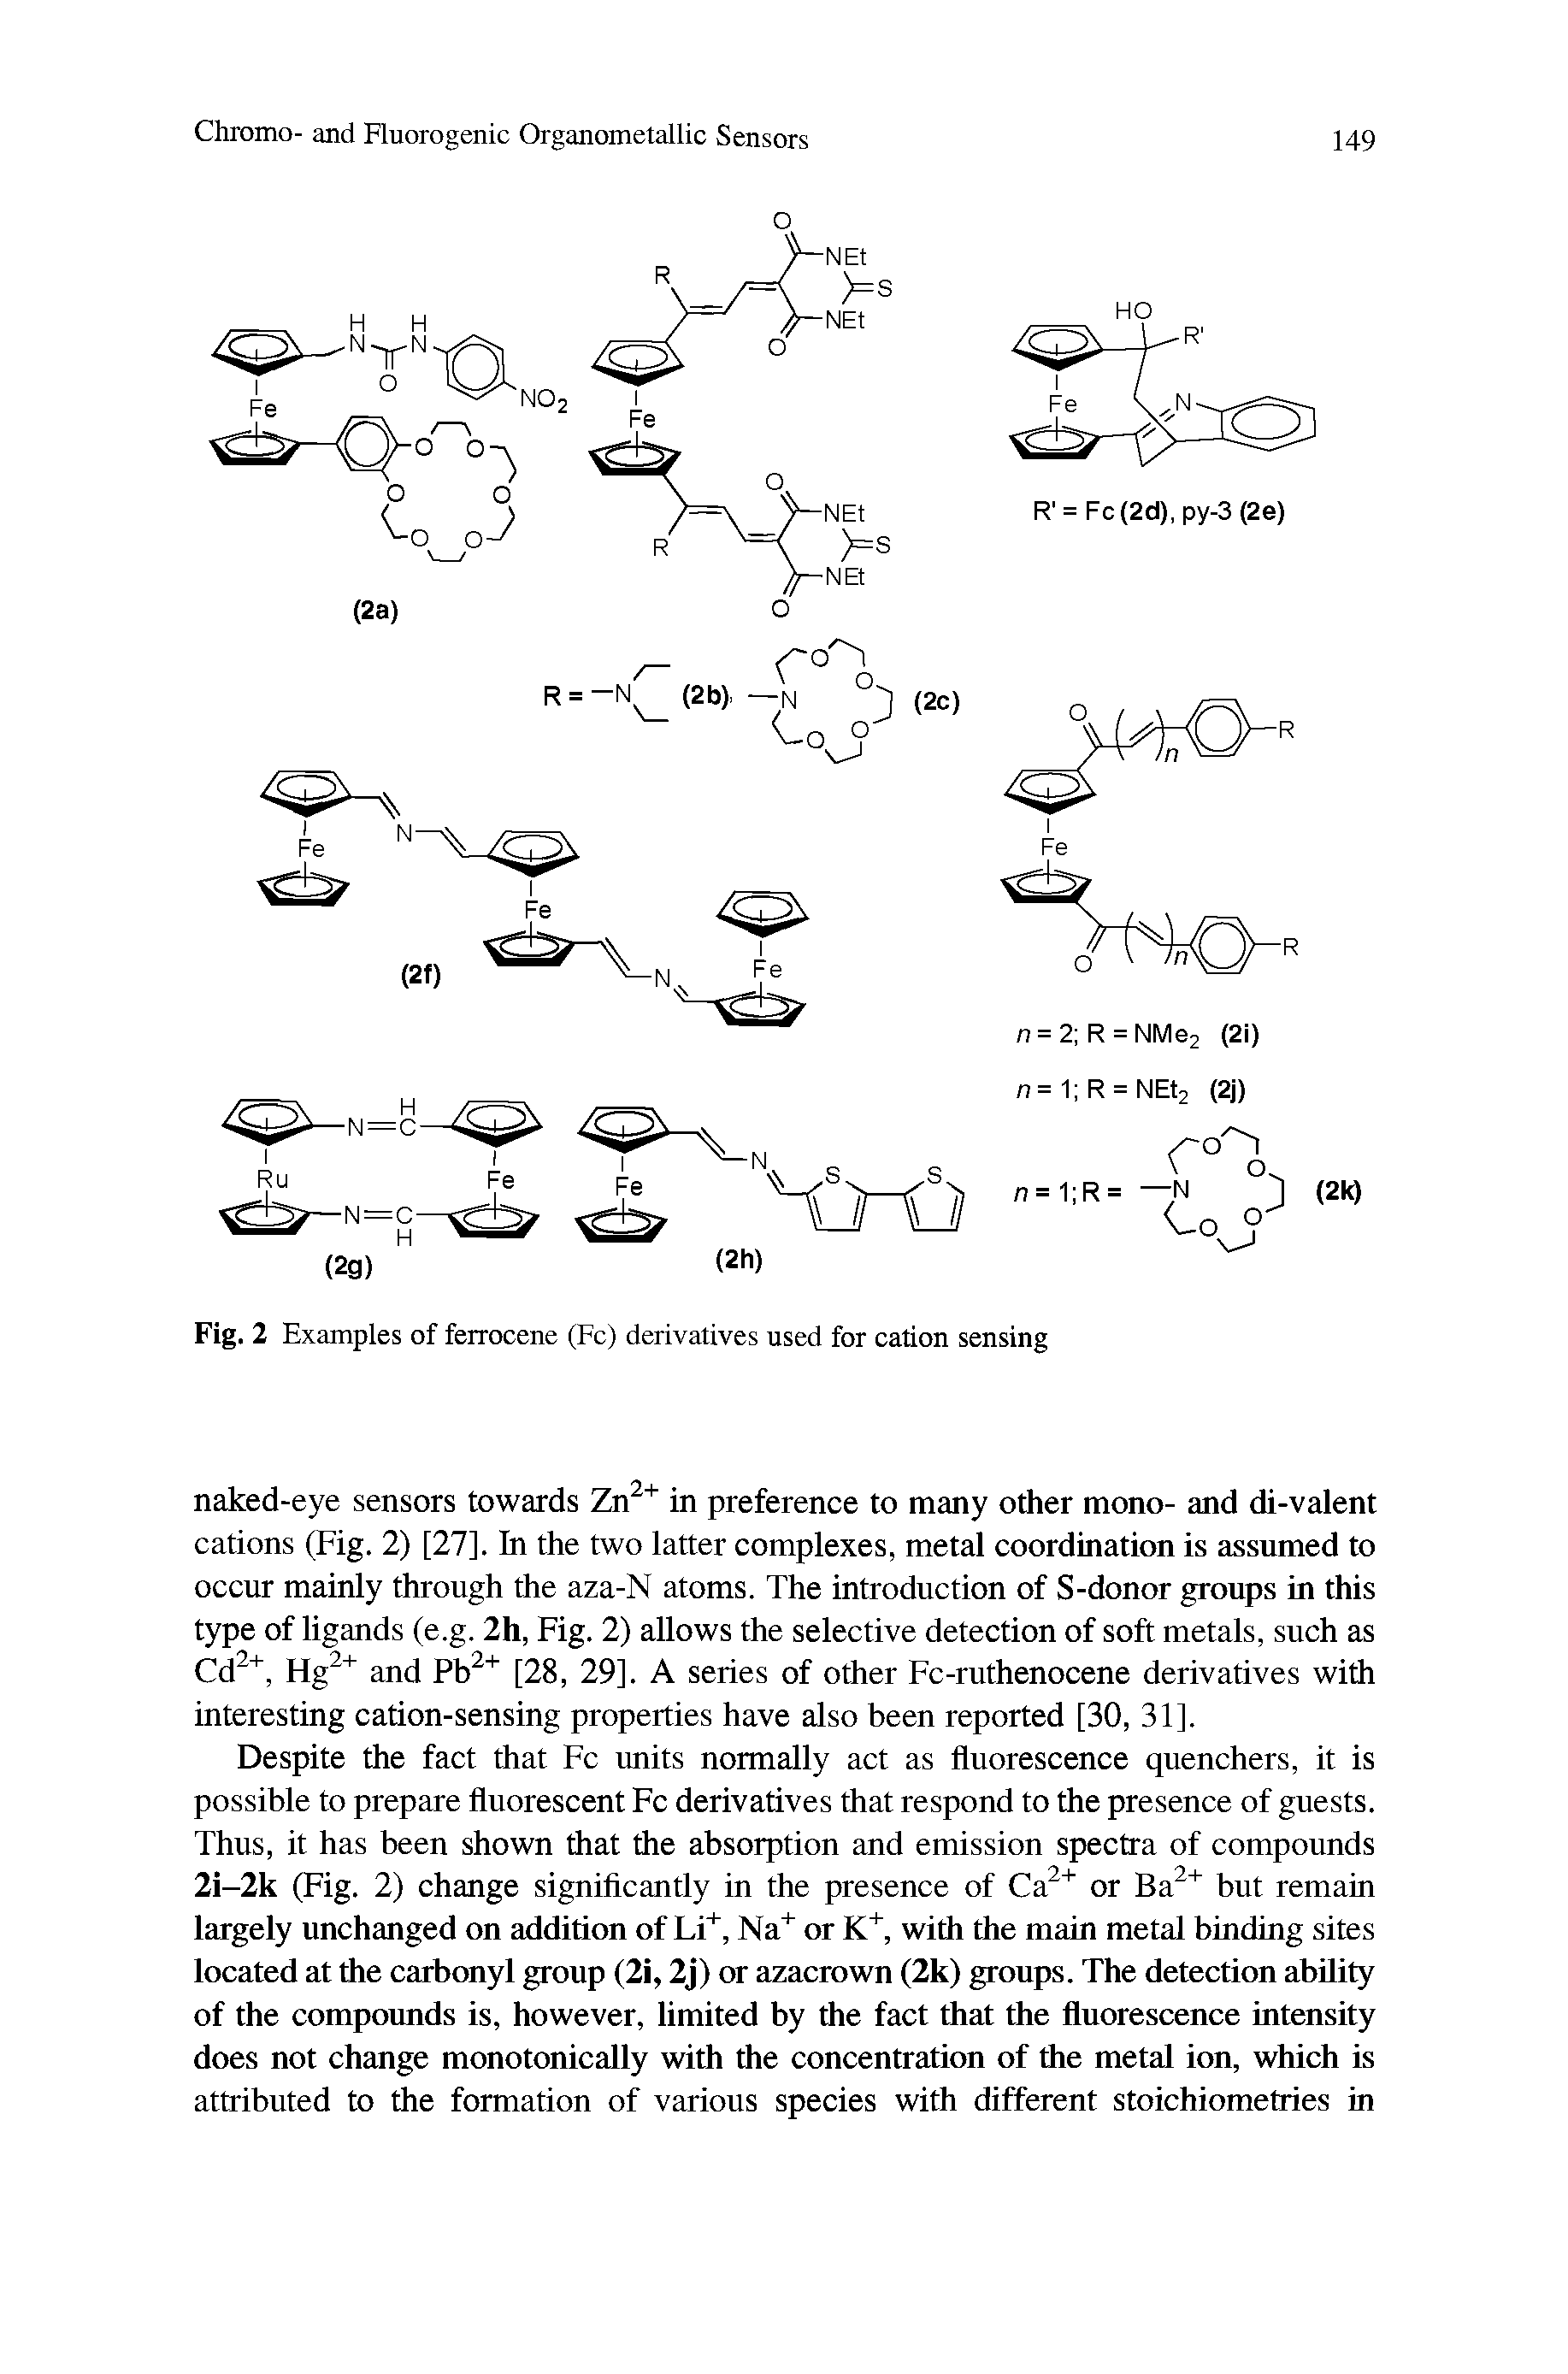 Fig. 2 Examples of ferrocene (Fc) derivatives used for cation sensing...